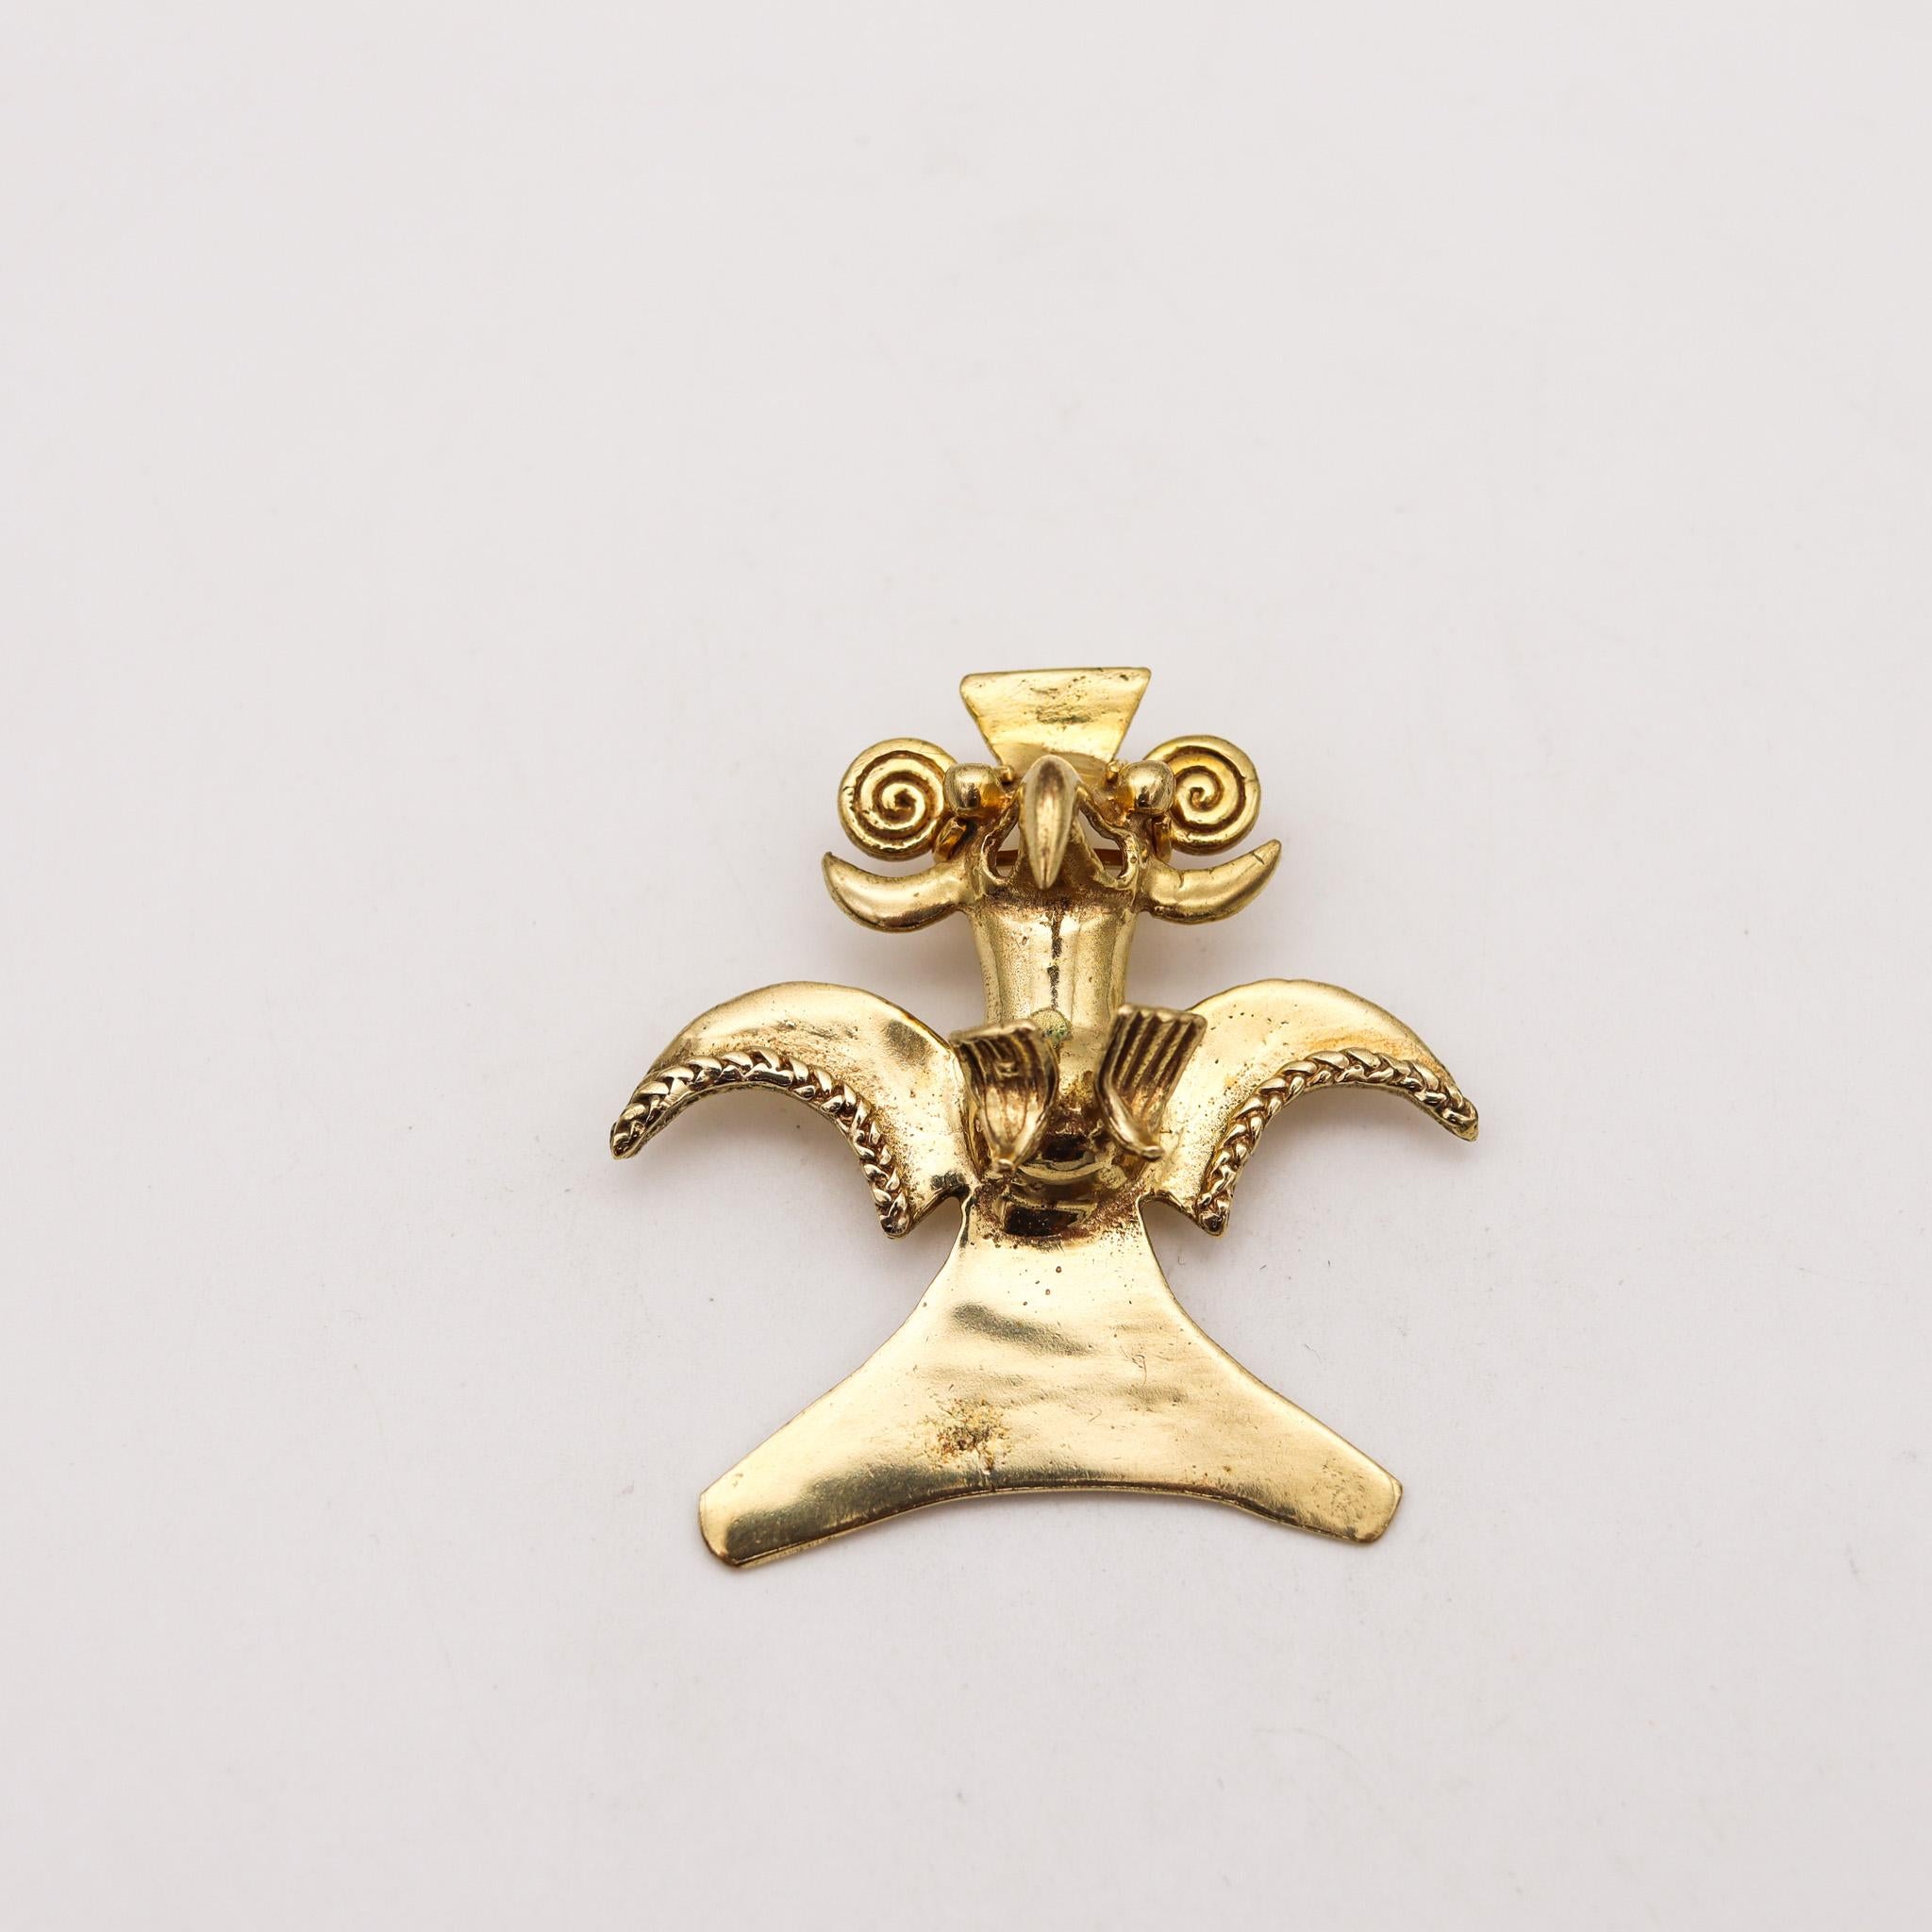 Tumbaga gold condor pendant from Costa Rica.

Very rare archeological pre-Columbian piece from the Central American region, between  Costa Rica and Panama. Created by the Chiriki culture, between the 800 and 1450 AD and crafted by the wax lost